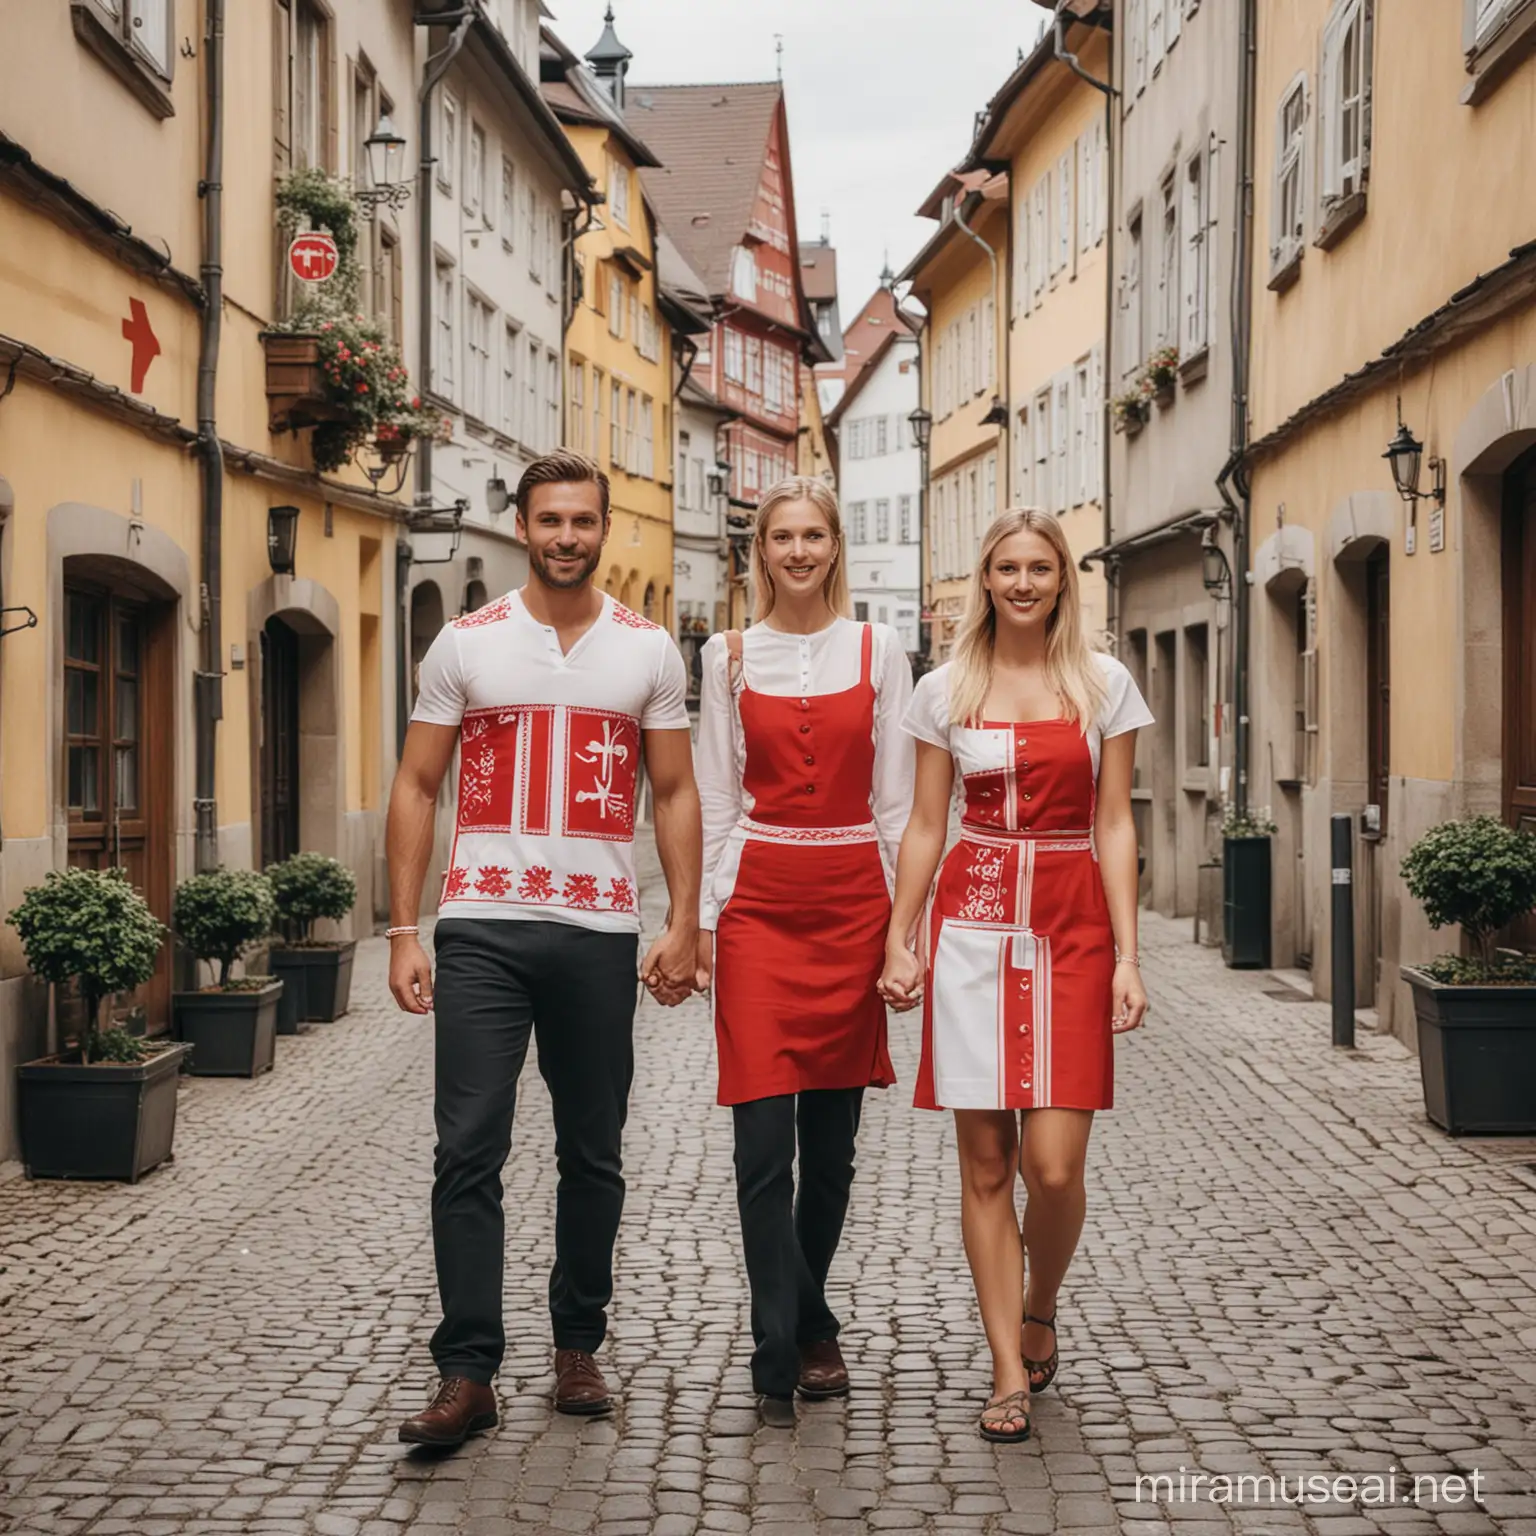 make a picture showing cultural differences with austrian and danes
